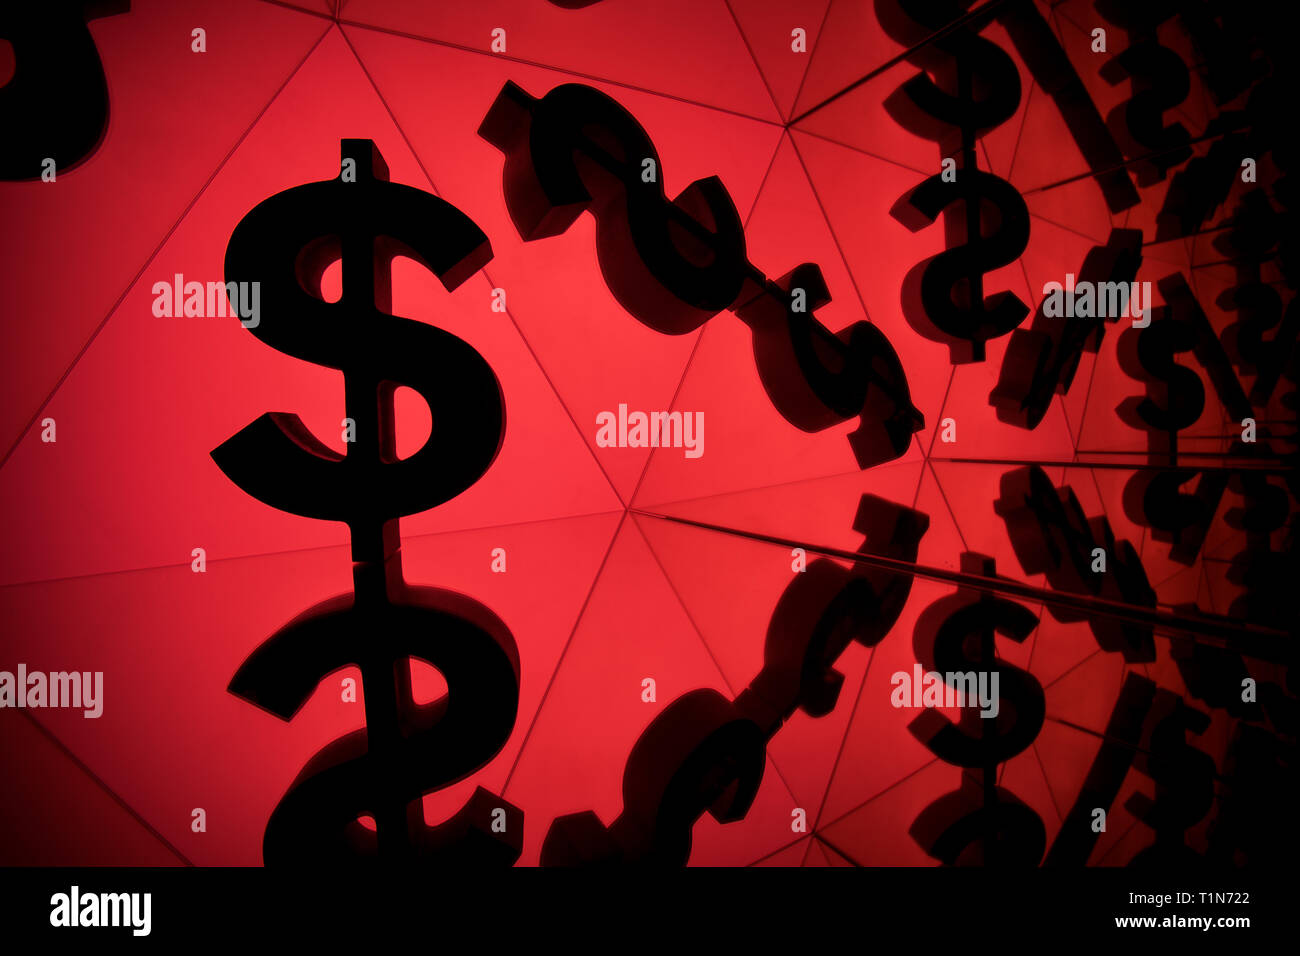 Dollar Currency Symbol With Many Mirroring Images of Itself on Red Background Stock Photo